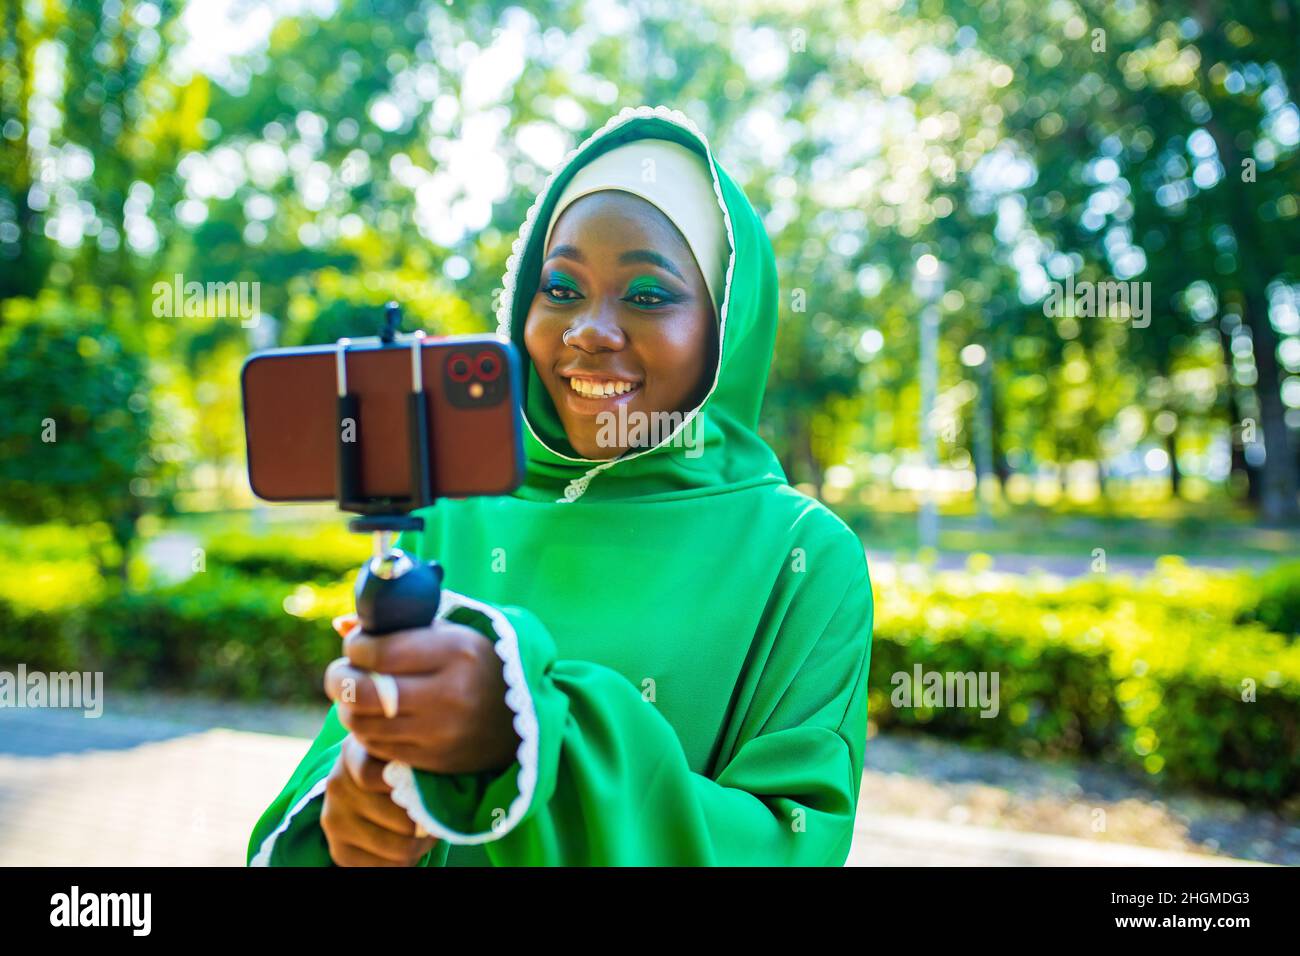 latin hispanic wonan in green muslim hijab with bright make up and nose piercing taking video stream outdoors summer park Stock Photo